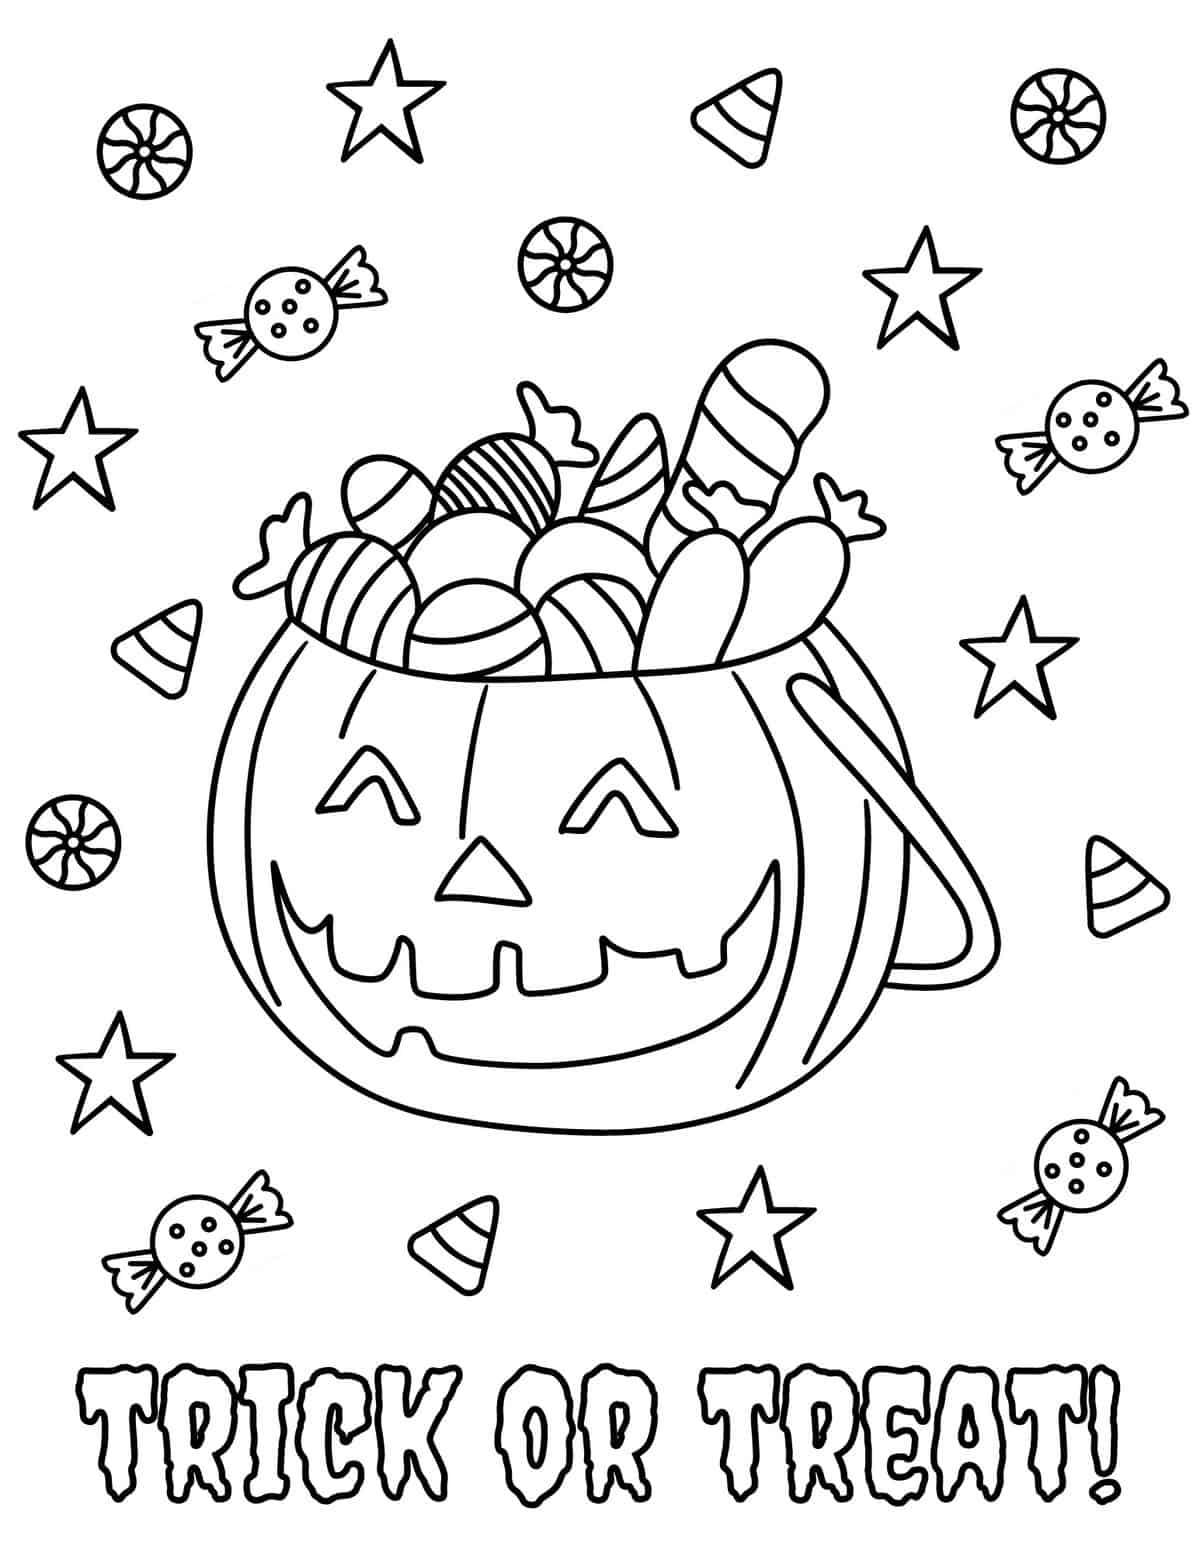 Trick or treat candy bucket and Halloween candies